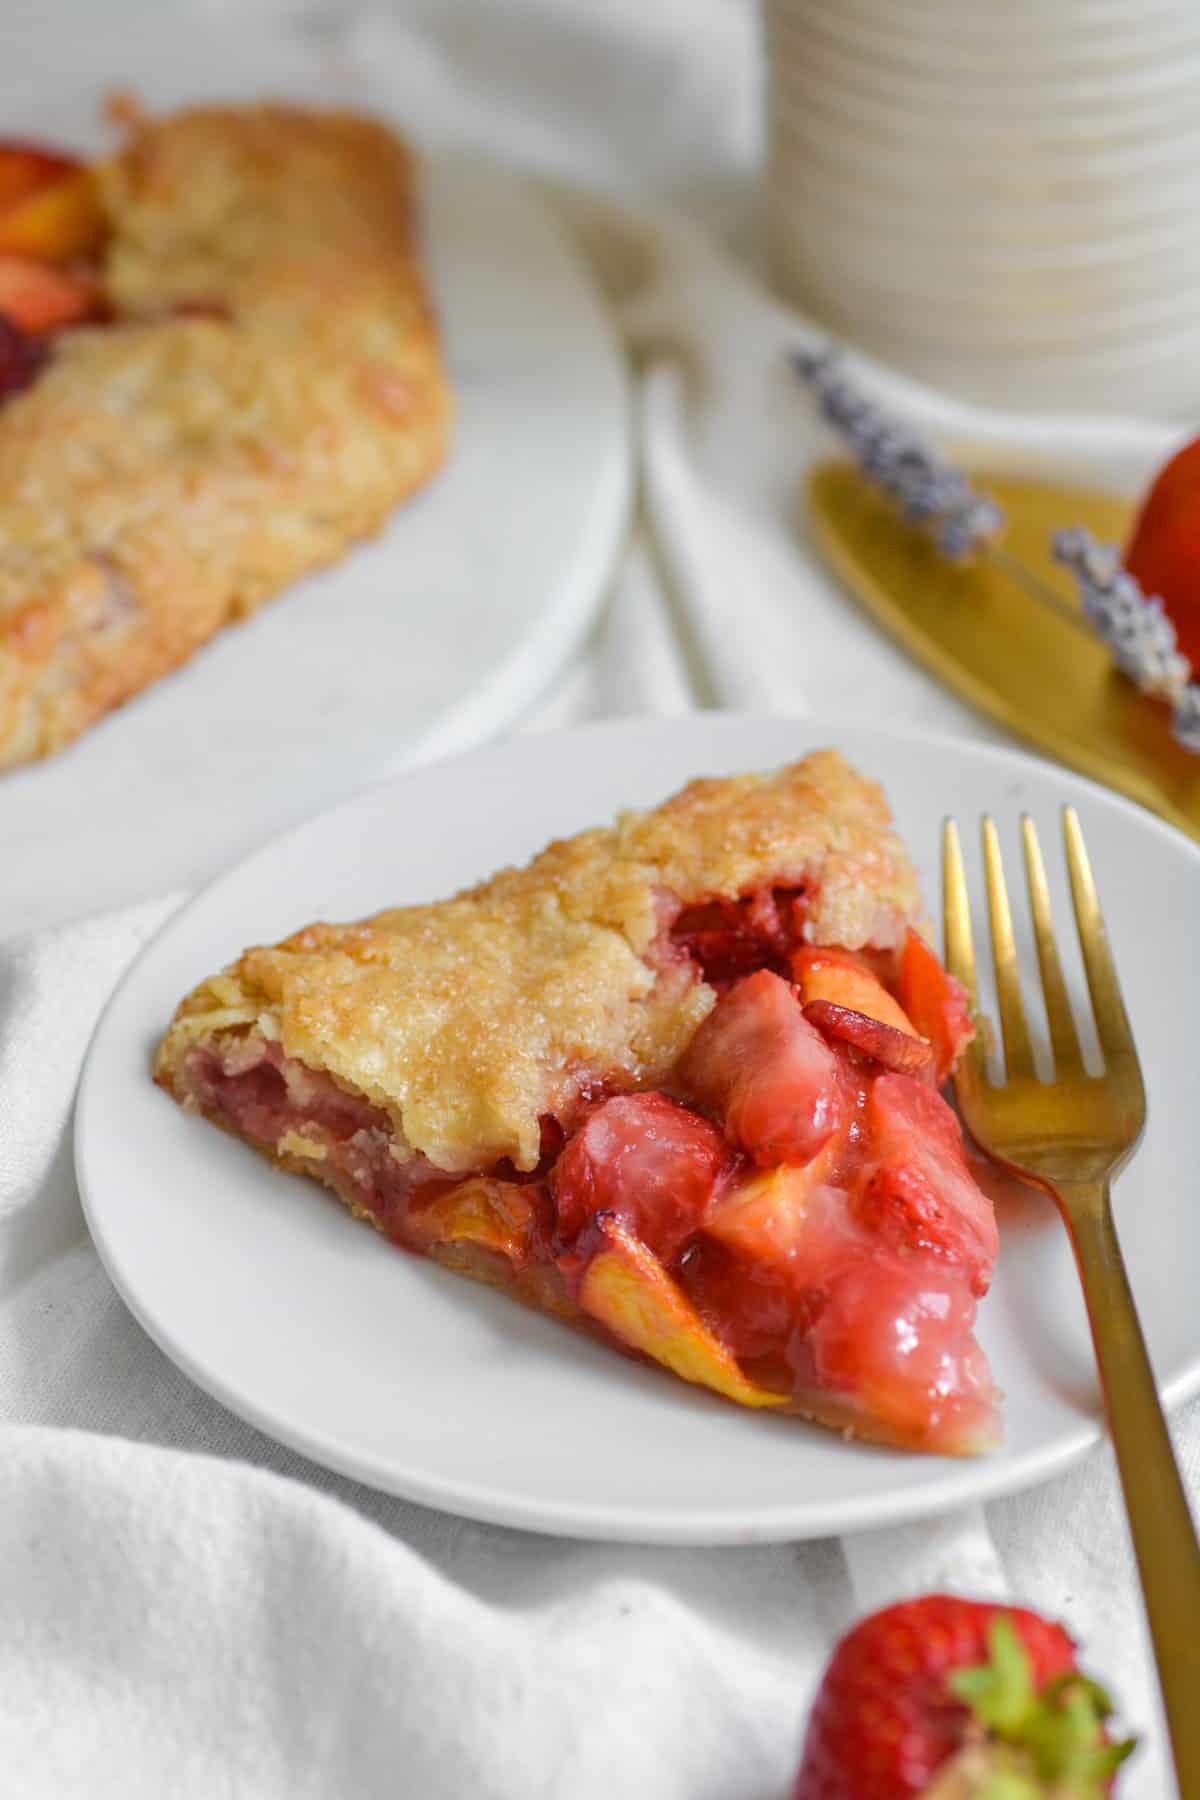 A slice of Vegan Strawberry peach galette on a white plate with a gold fork.